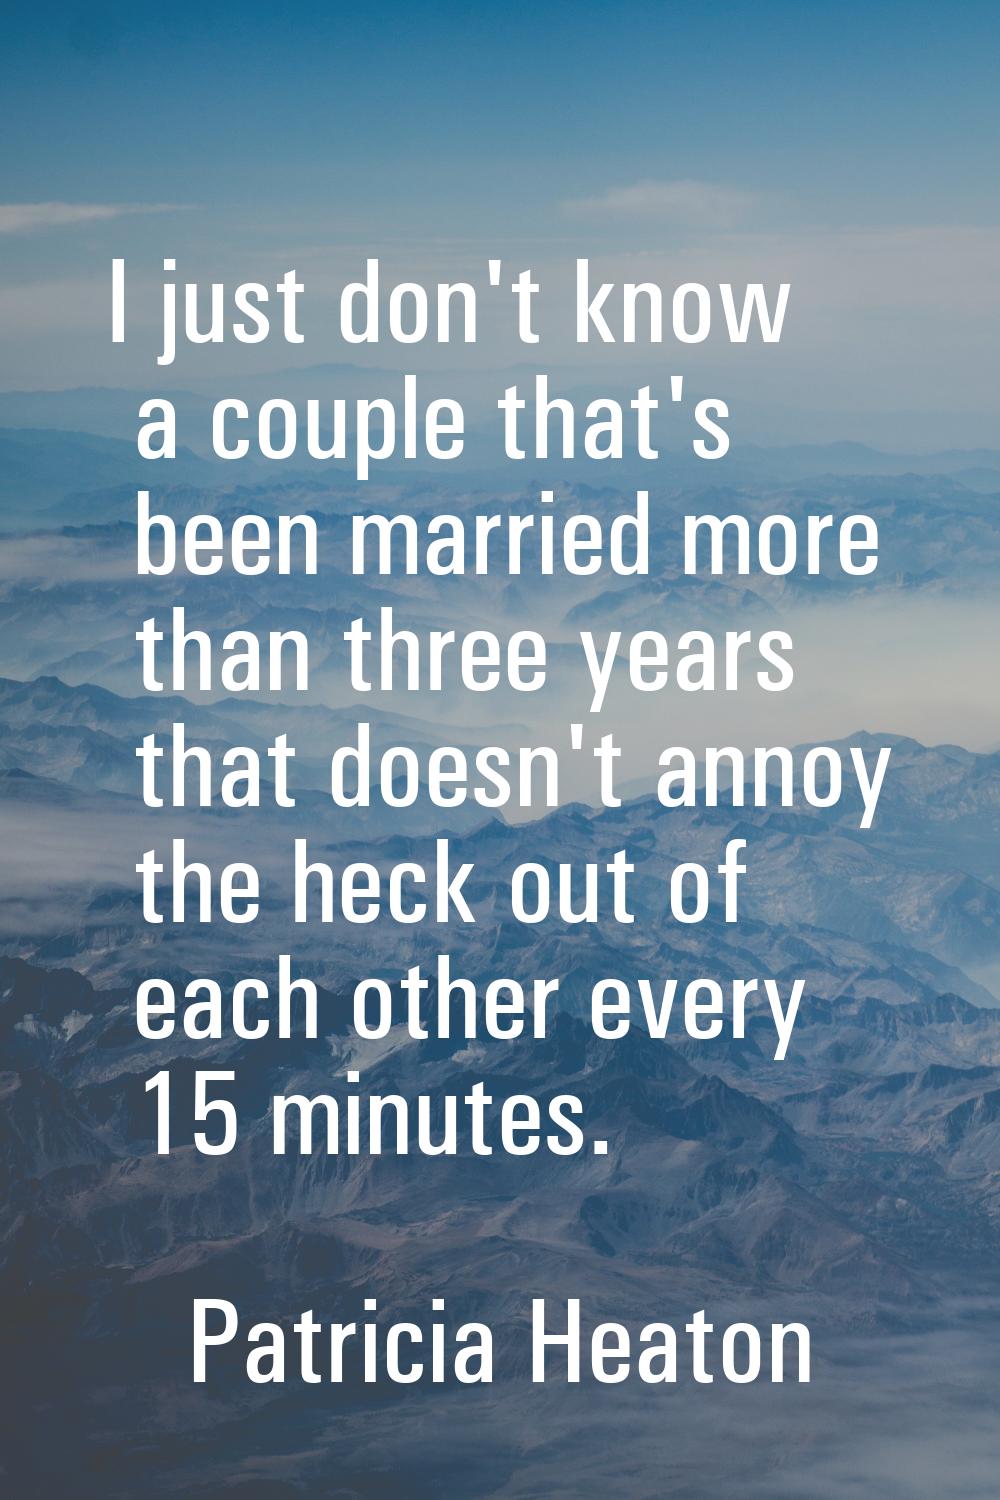 I just don't know a couple that's been married more than three years that doesn't annoy the heck ou